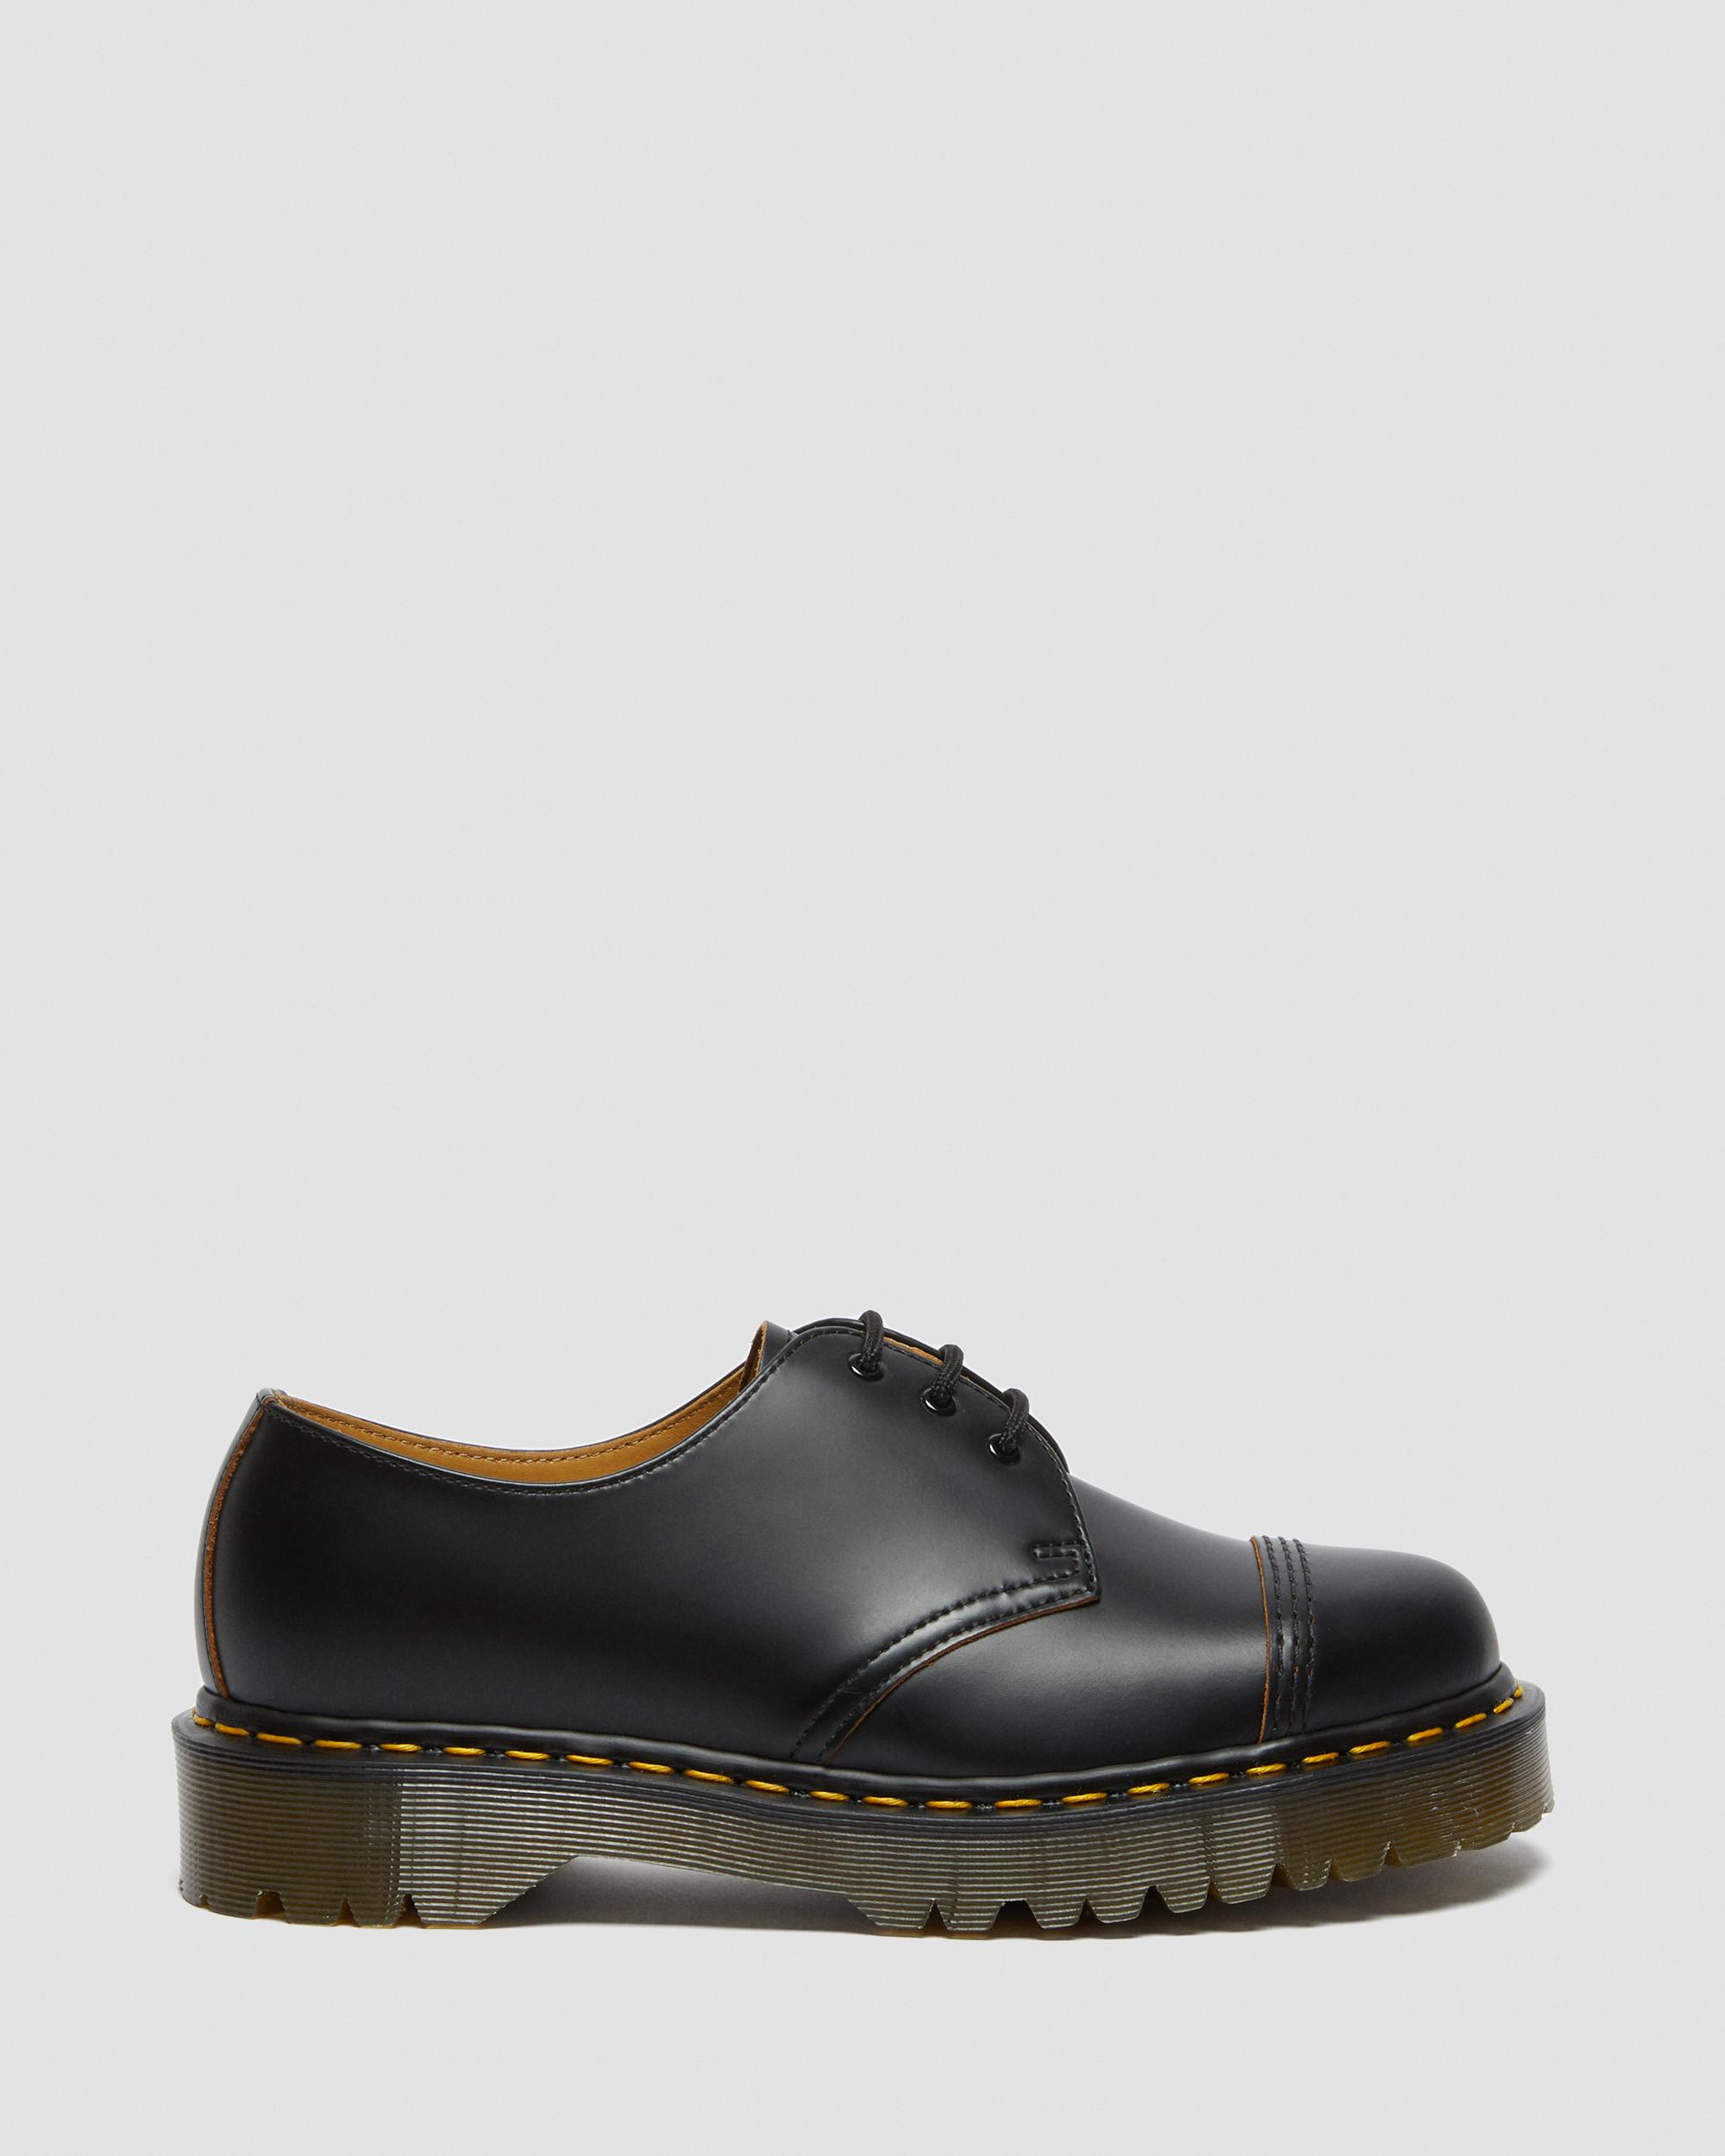 DR MARTENS 1461 Bex Made in England Toe Cap Oxford Shoes